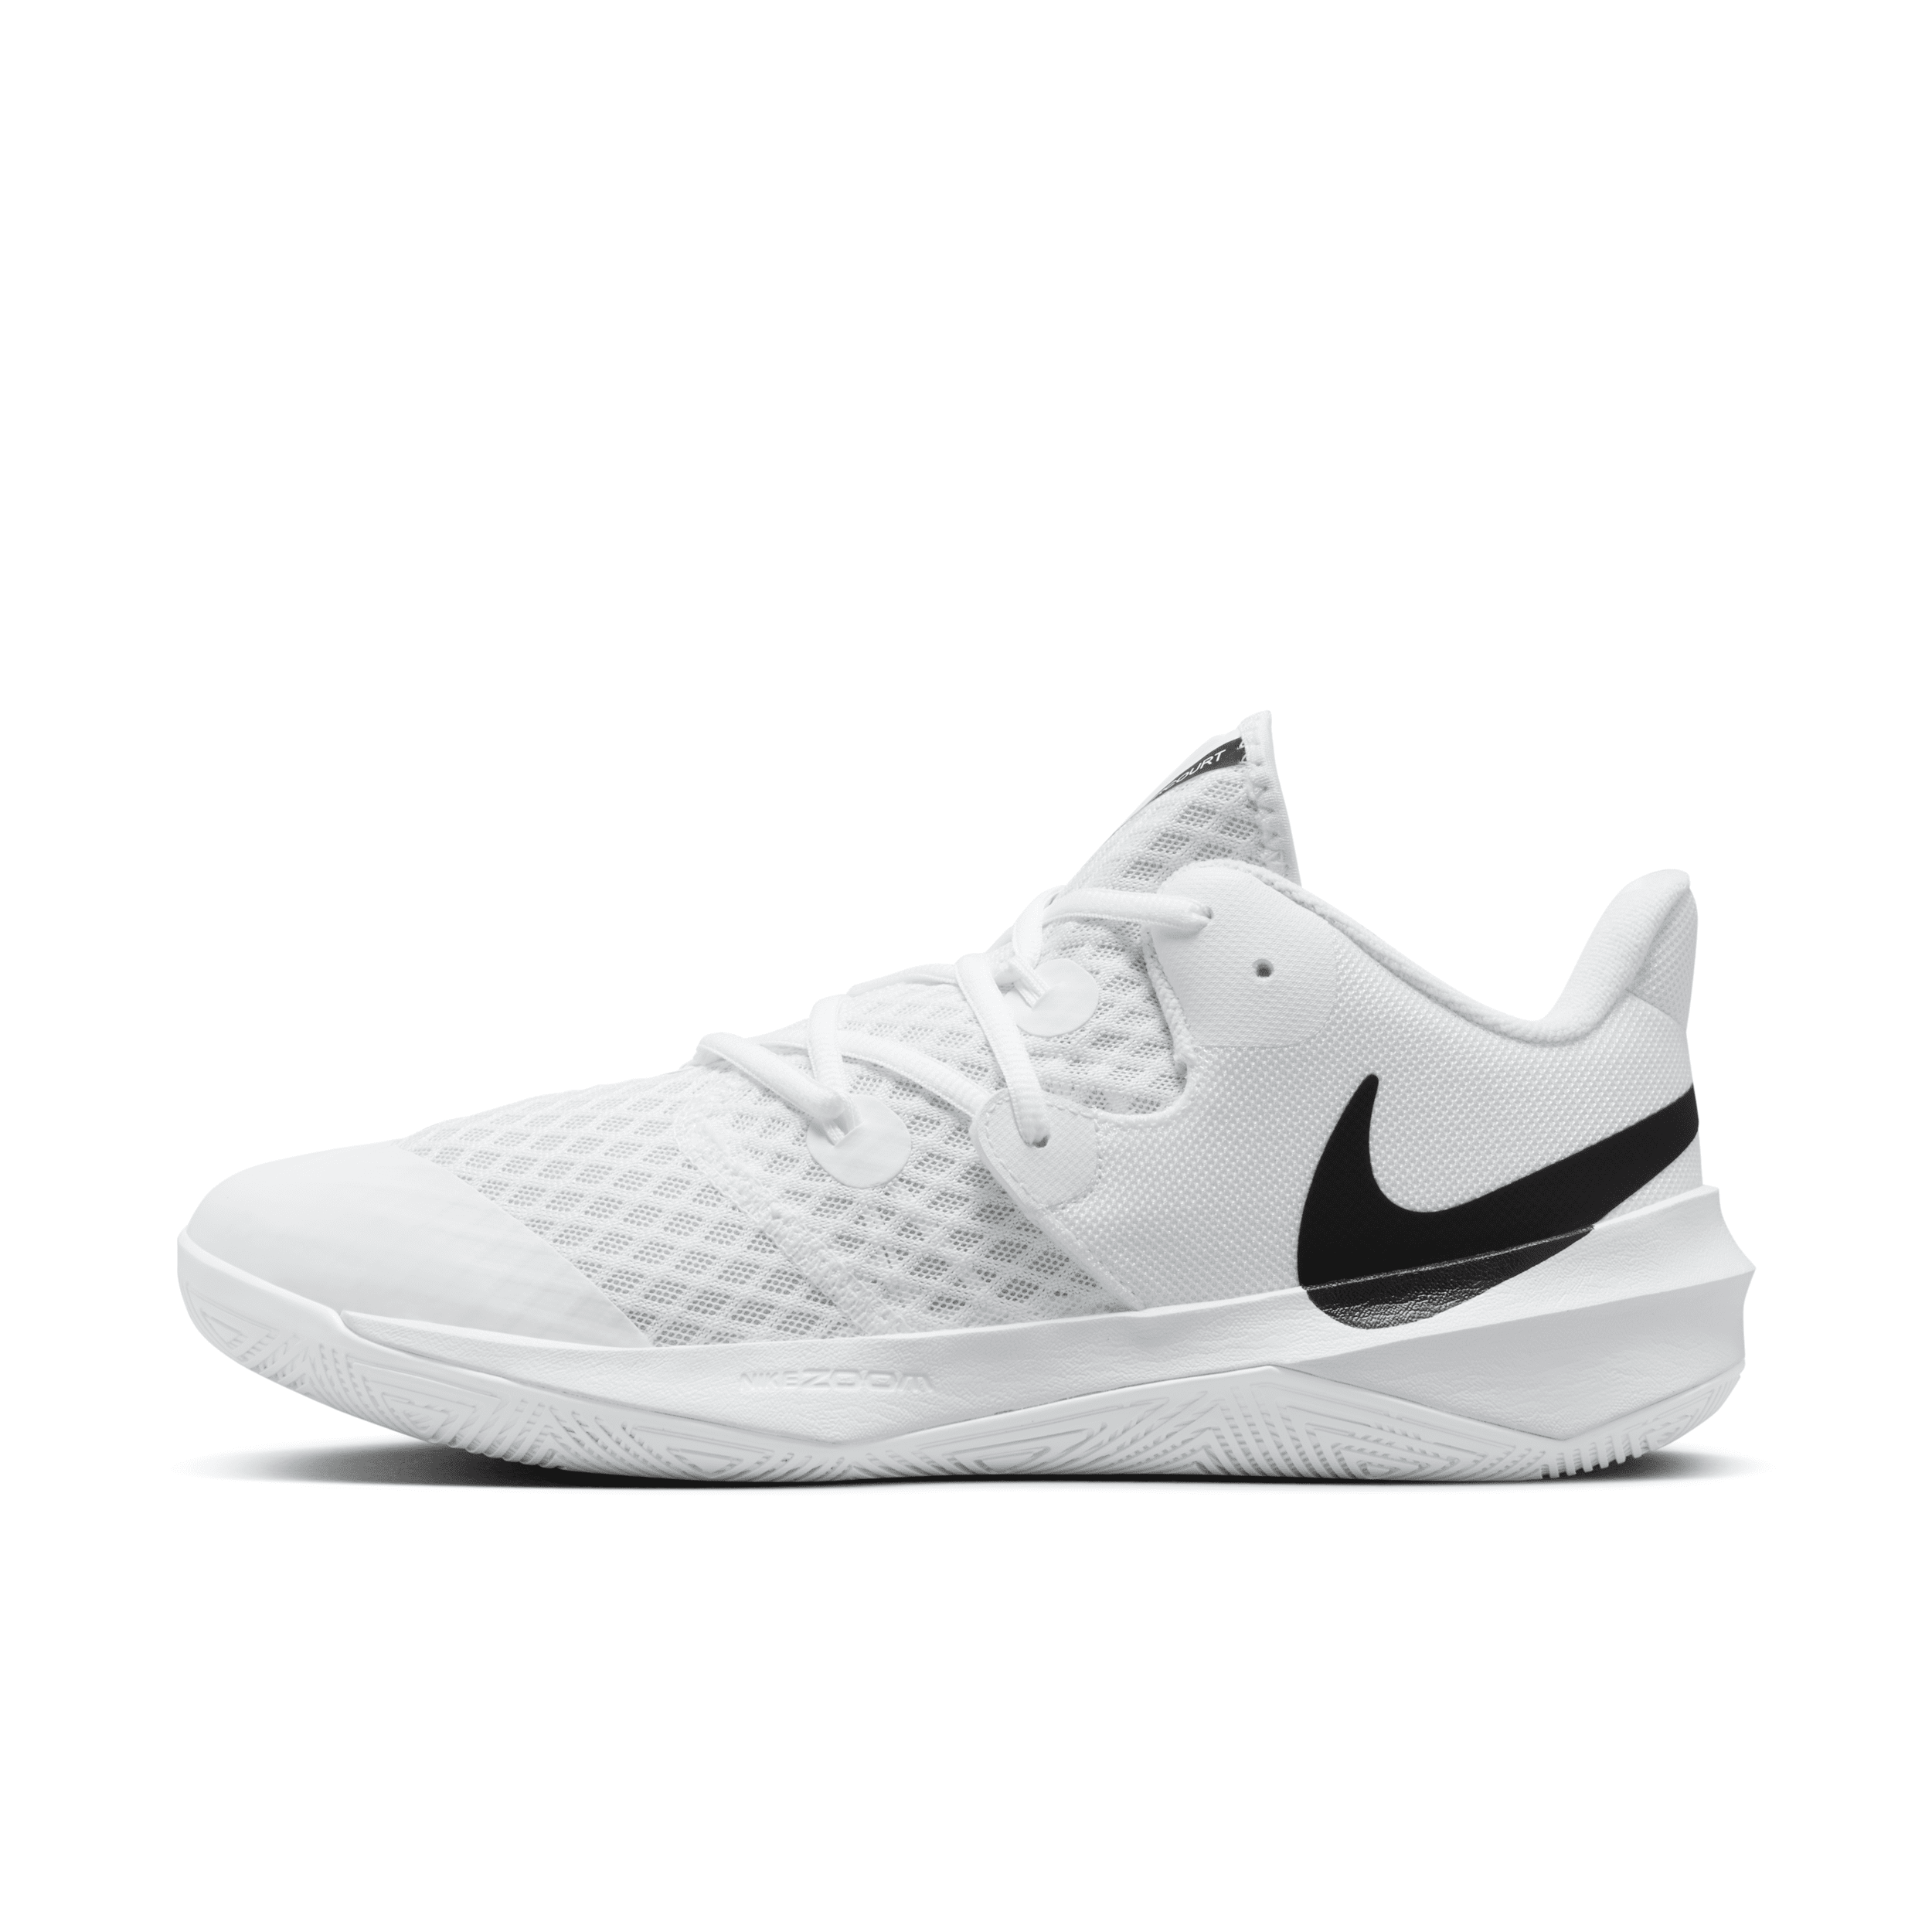 Nike Unisex Hyperspeed Court Volleyball Shoes In White